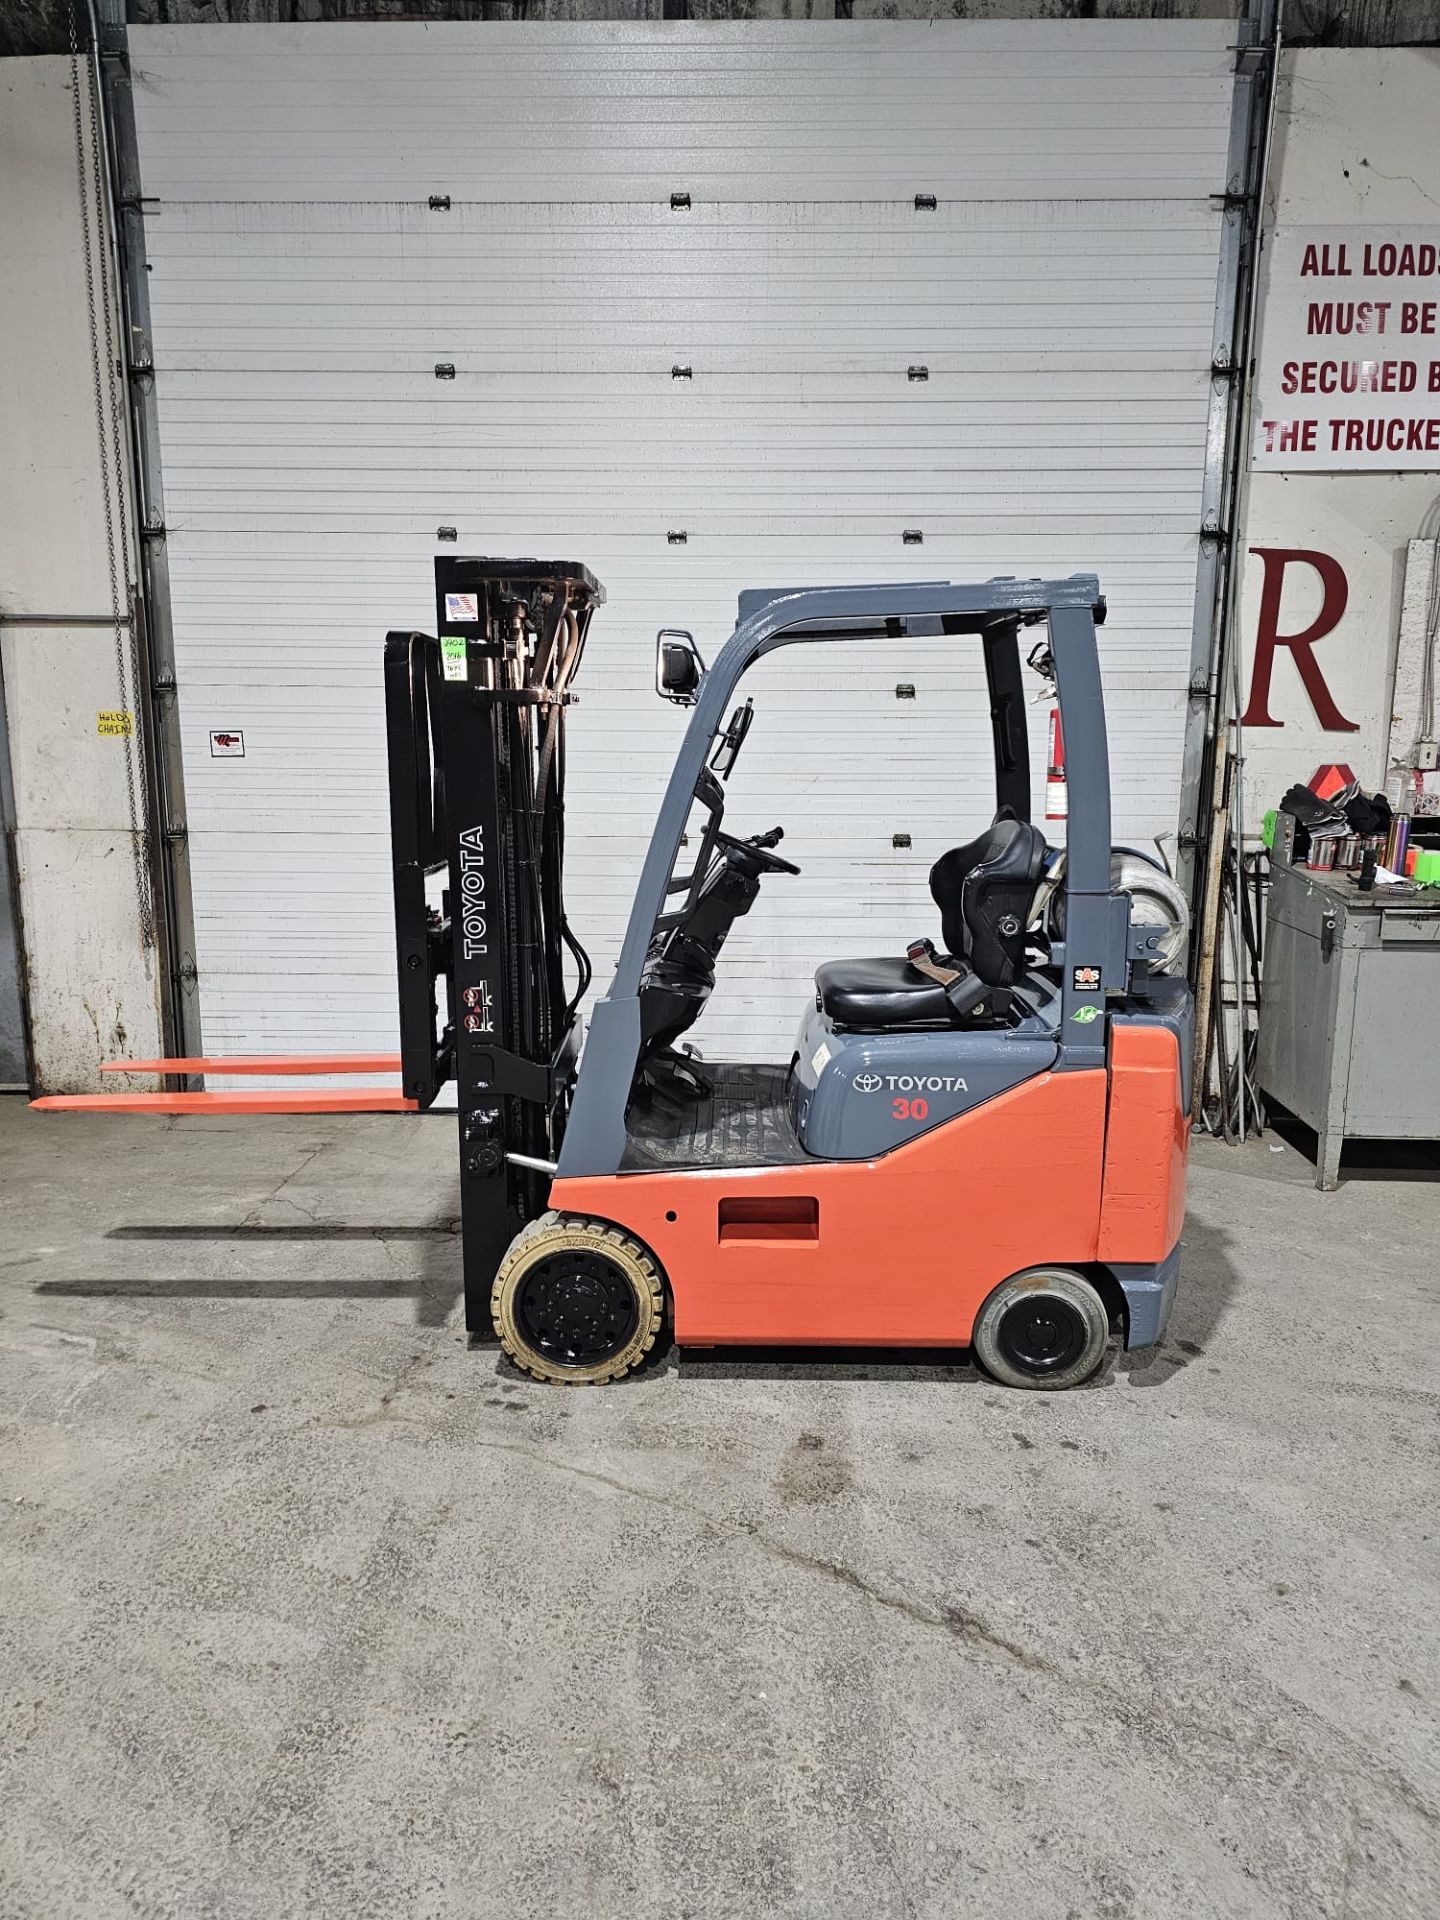 2016 TOYOTA 3,000lbs Capacity LPG (Propane) Forklift with sideshift and 3-STAGE MAST & Non marking